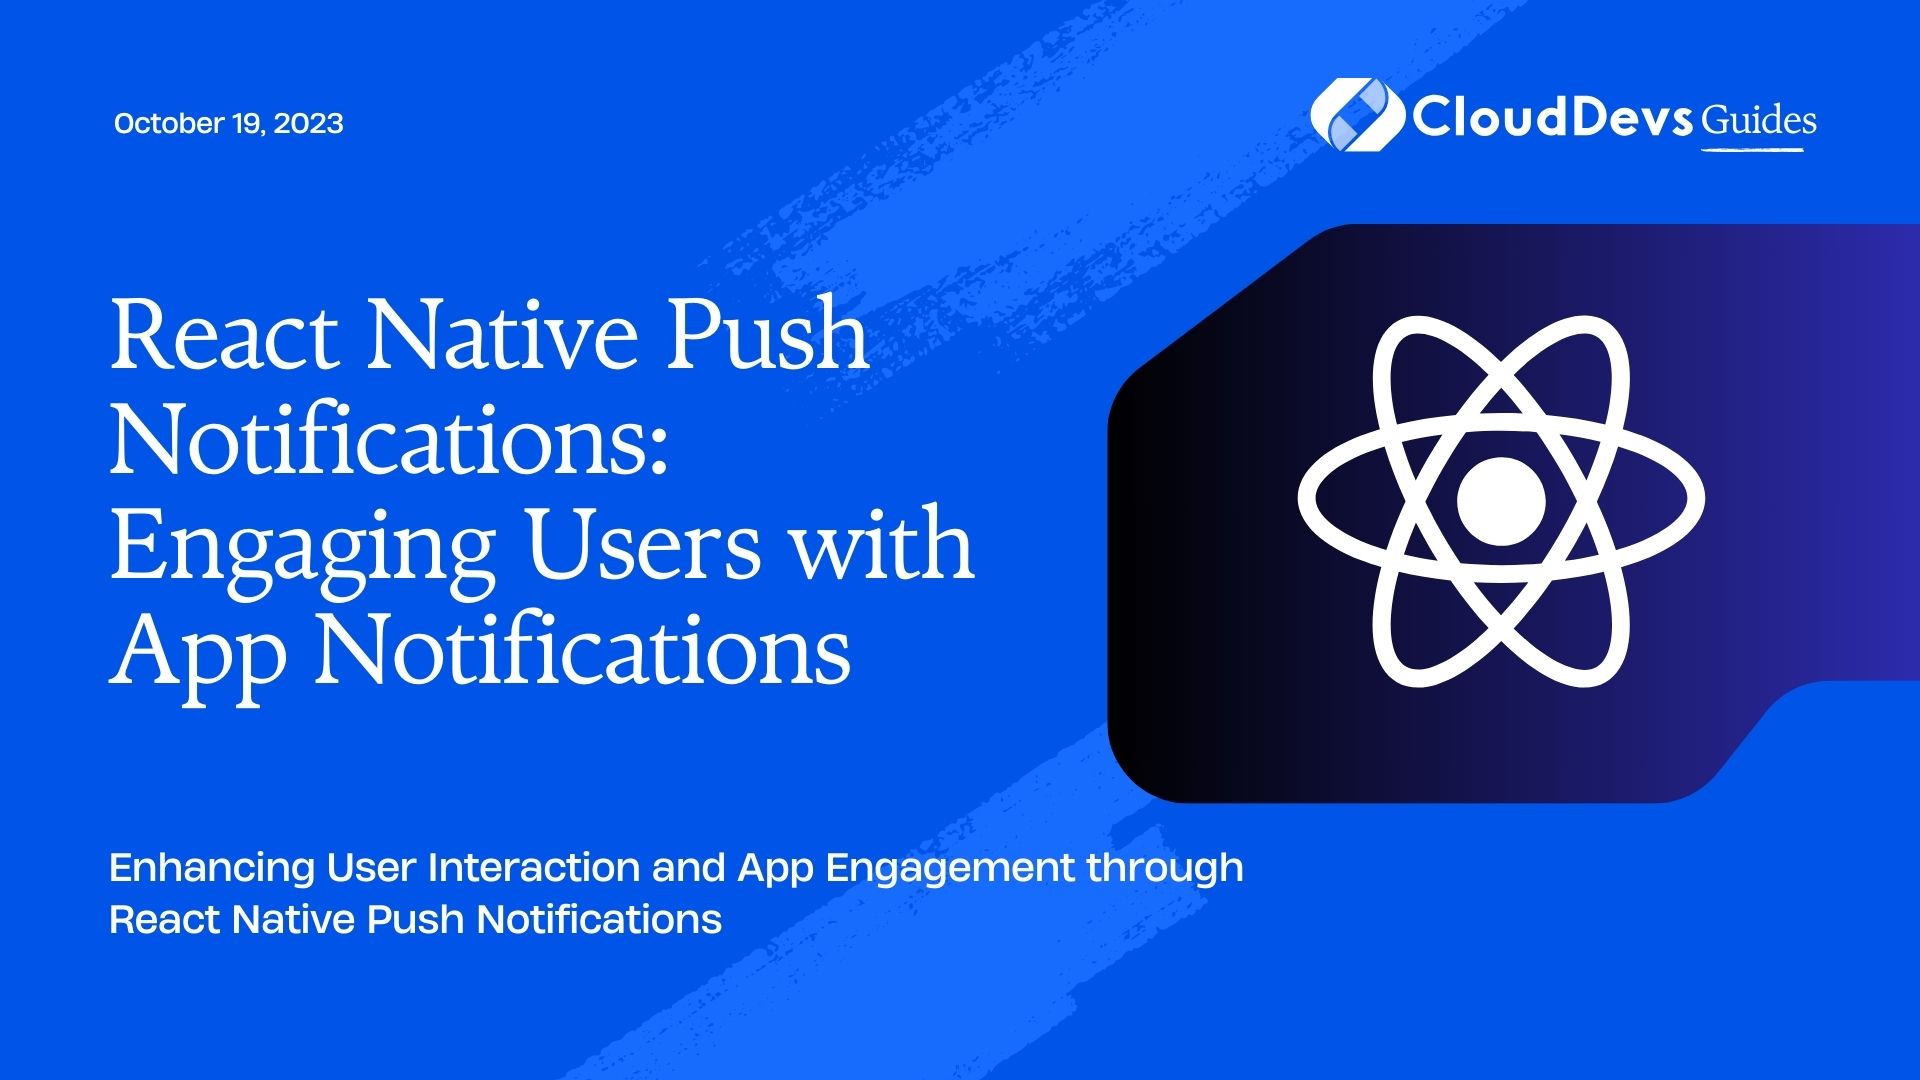 React Native Push Notifications: Engaging Users with App Notifications